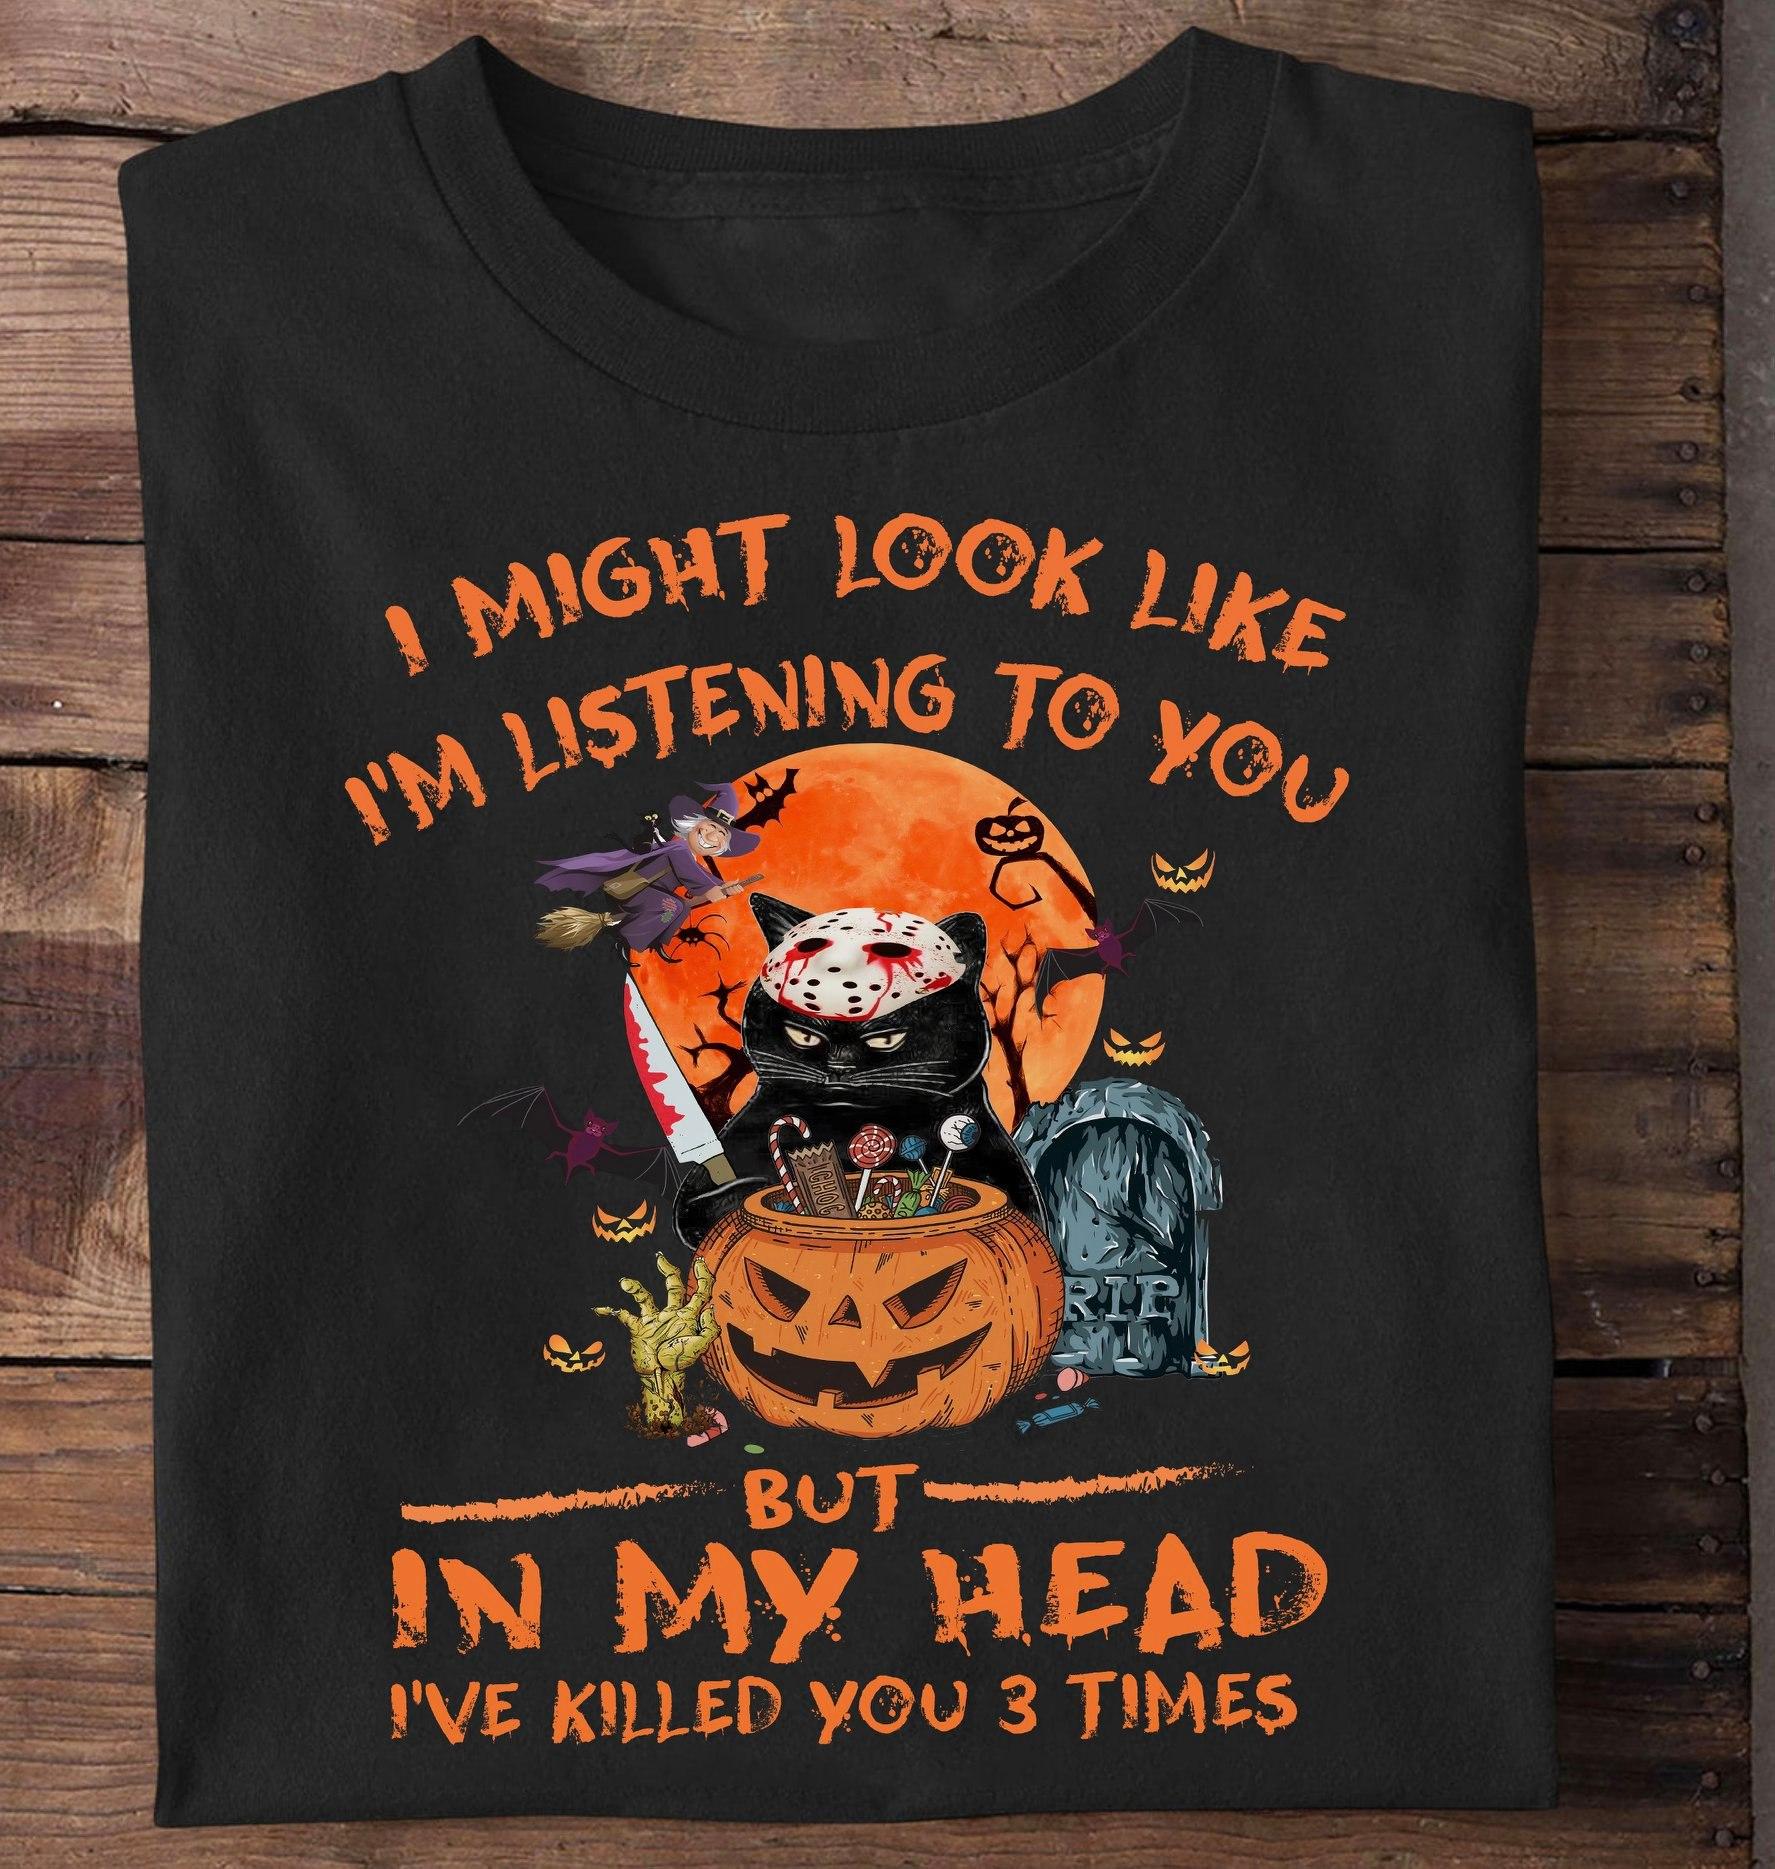 I might look like I'm listening to you but in my head I've killed you 3 times - Halloween cat killer, Devil pumpkin for Halloween